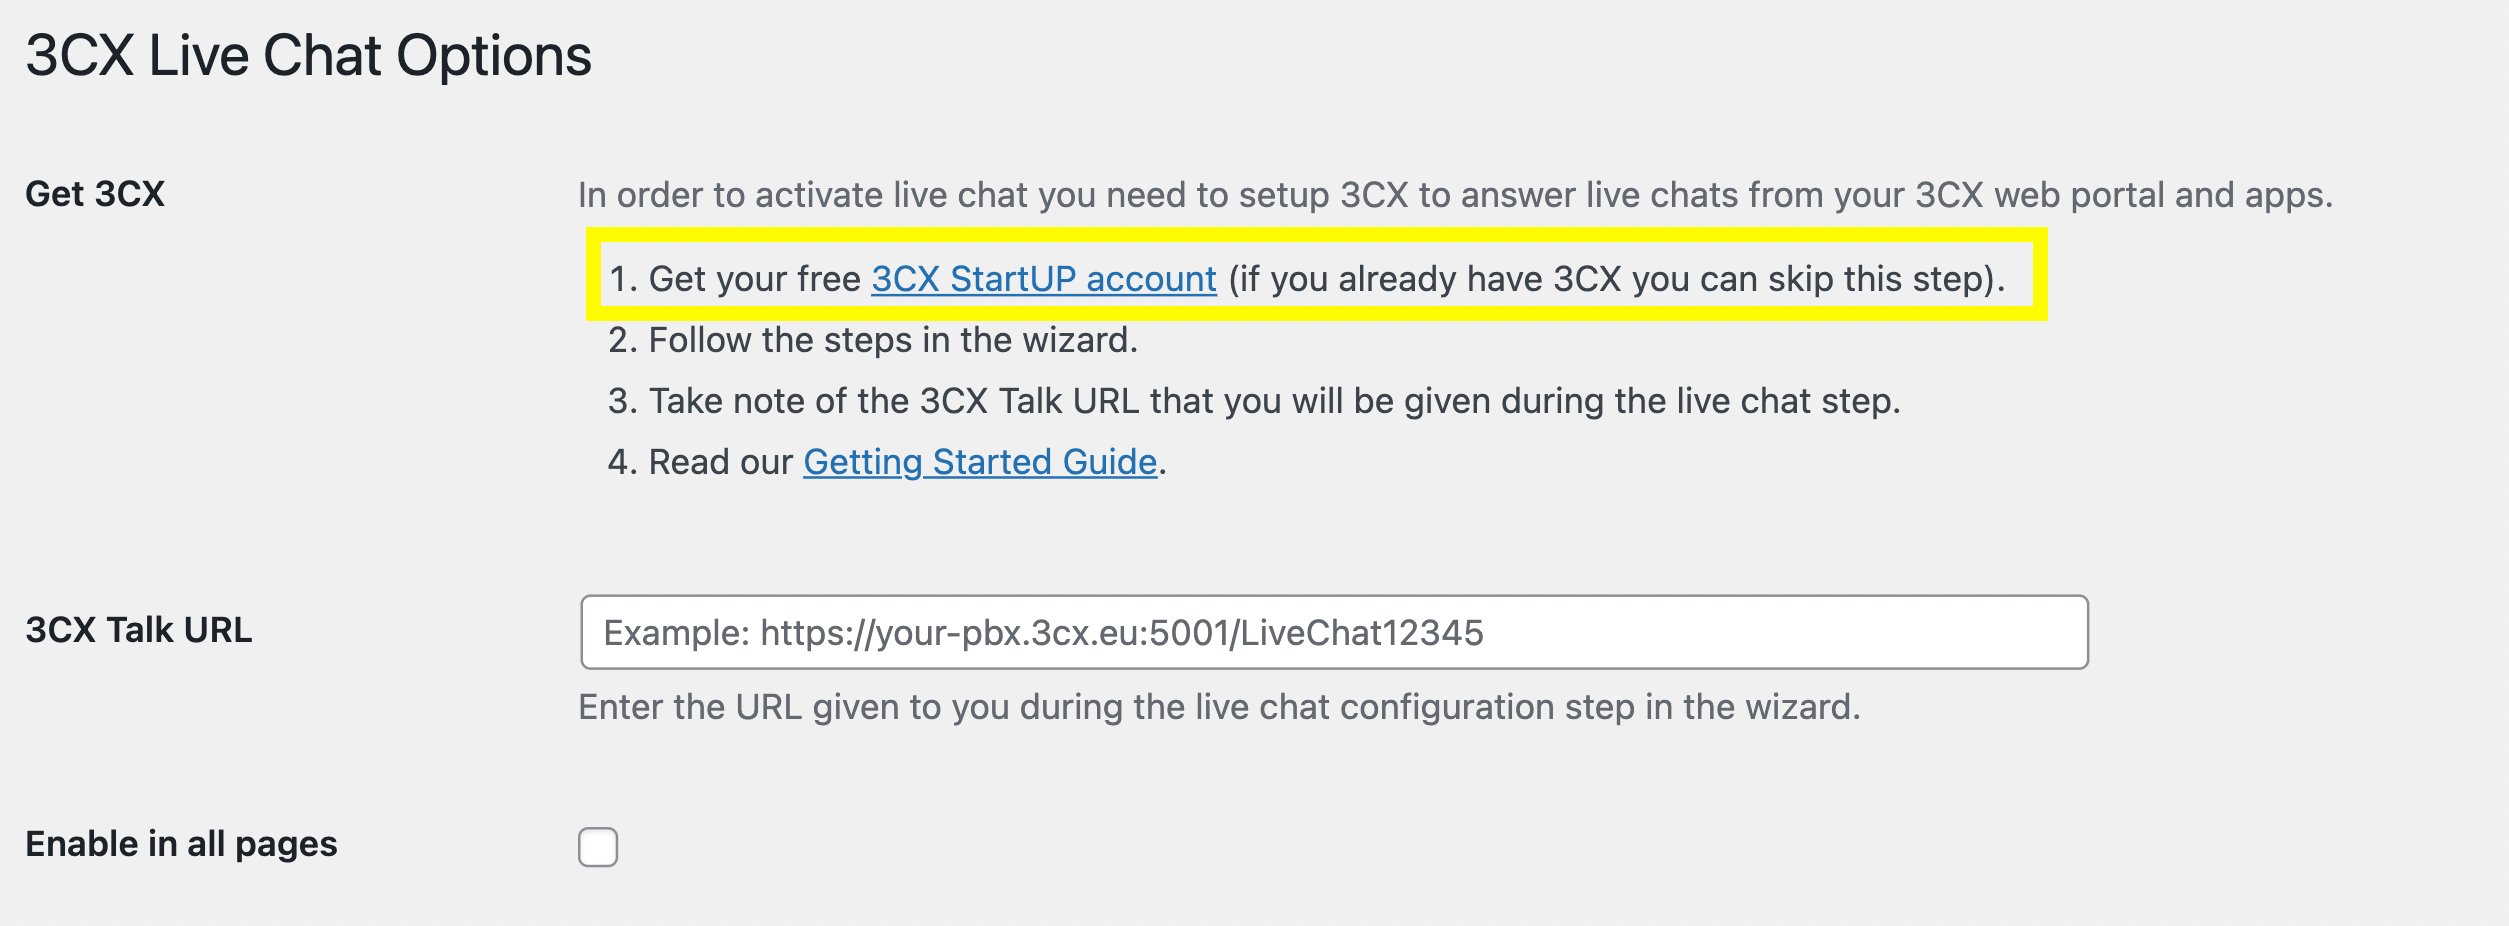 Following the steps to get 3CX Free Live Chat plugin. 